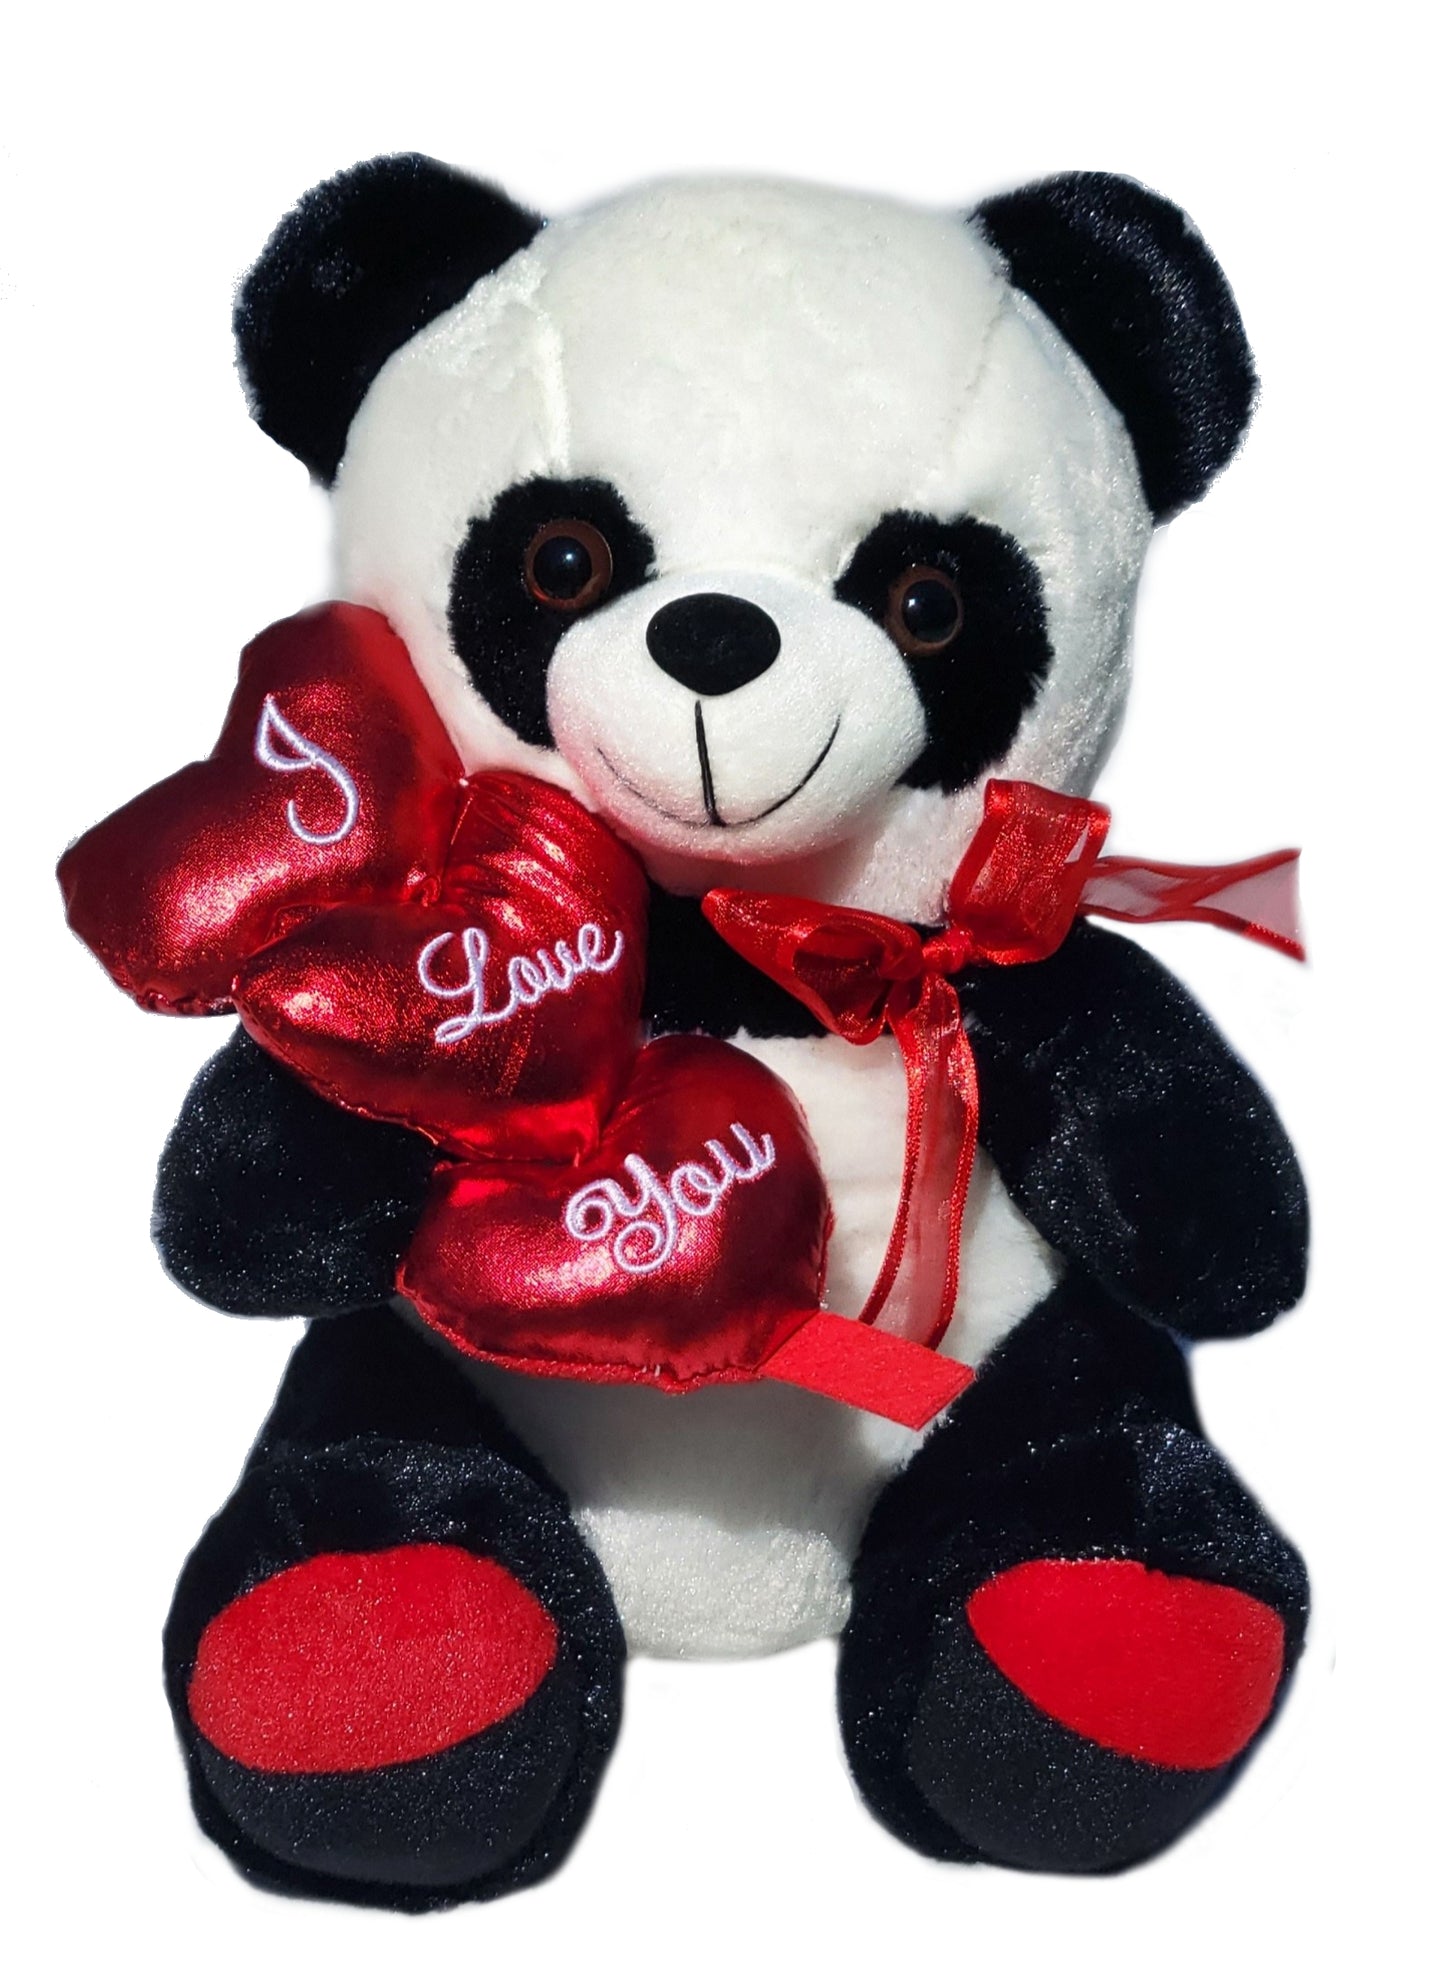 Panda Bear Holding I Love You Heart Bouquet 12in Valentine's Day Gift & Home Decor Birthday